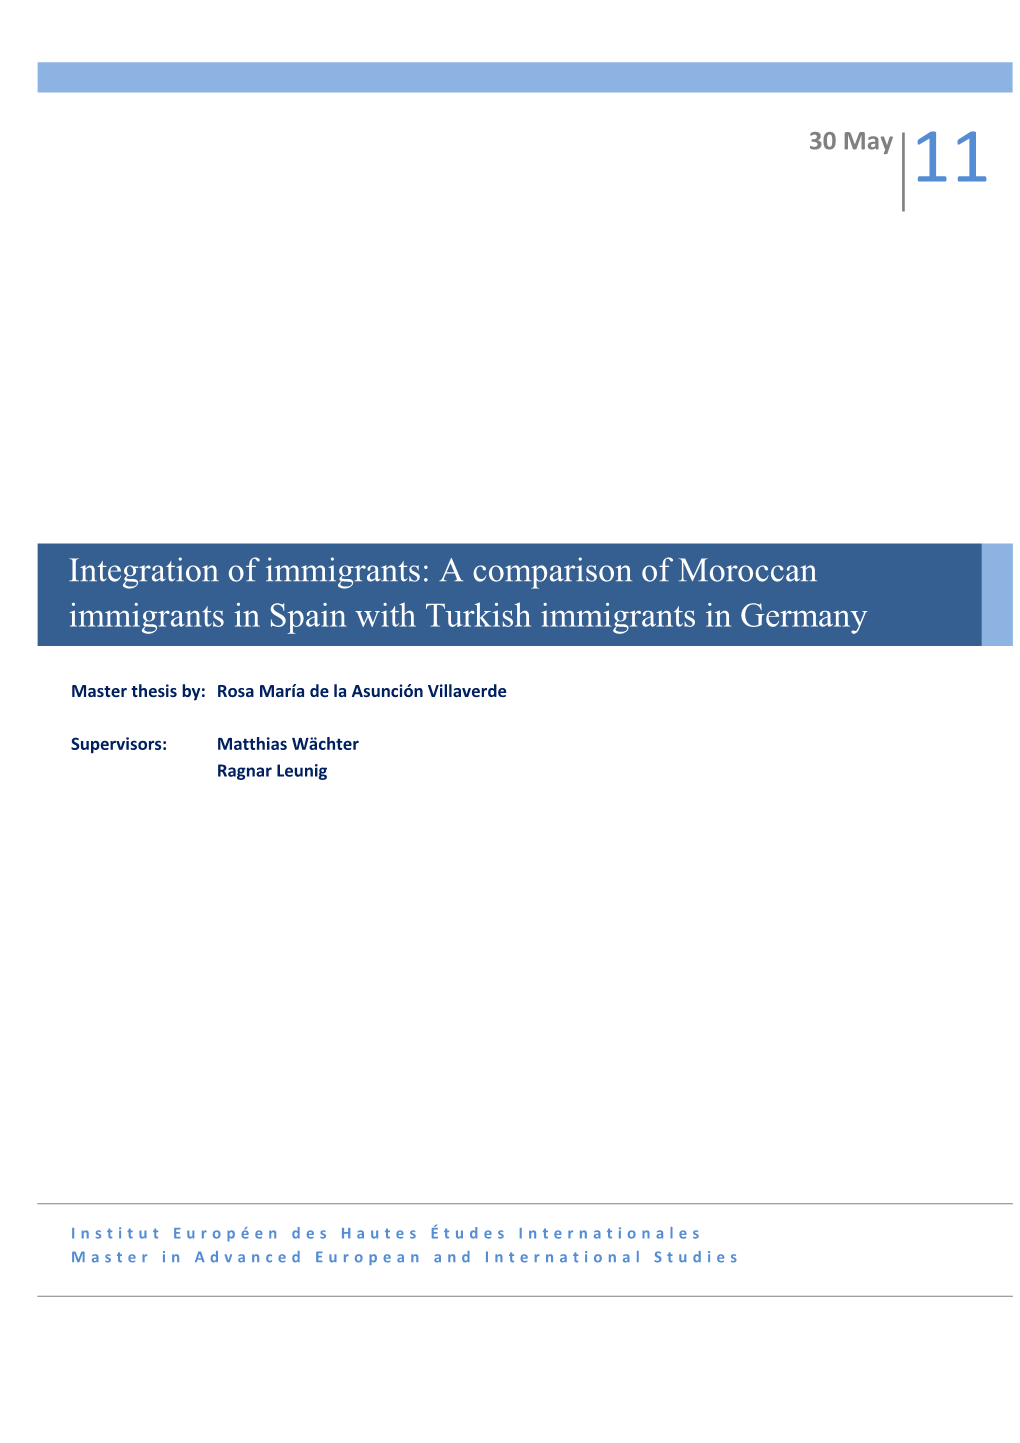 A Comparison of Moroccan Immigrants in Spain with Turkish Immigrants in Germany